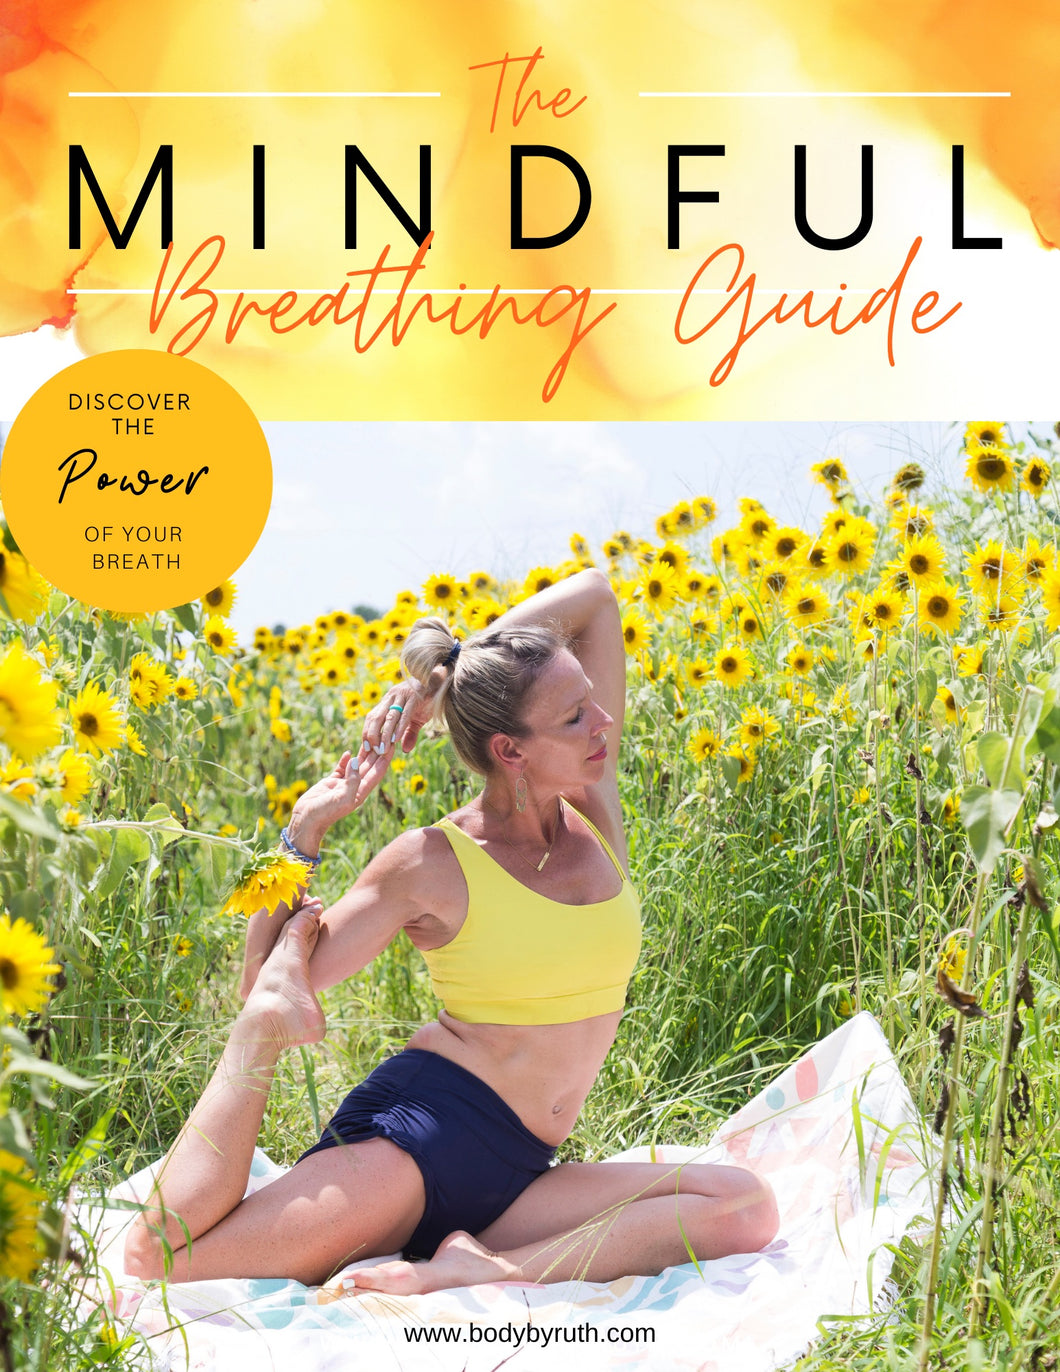 Mindful Breathing Guide